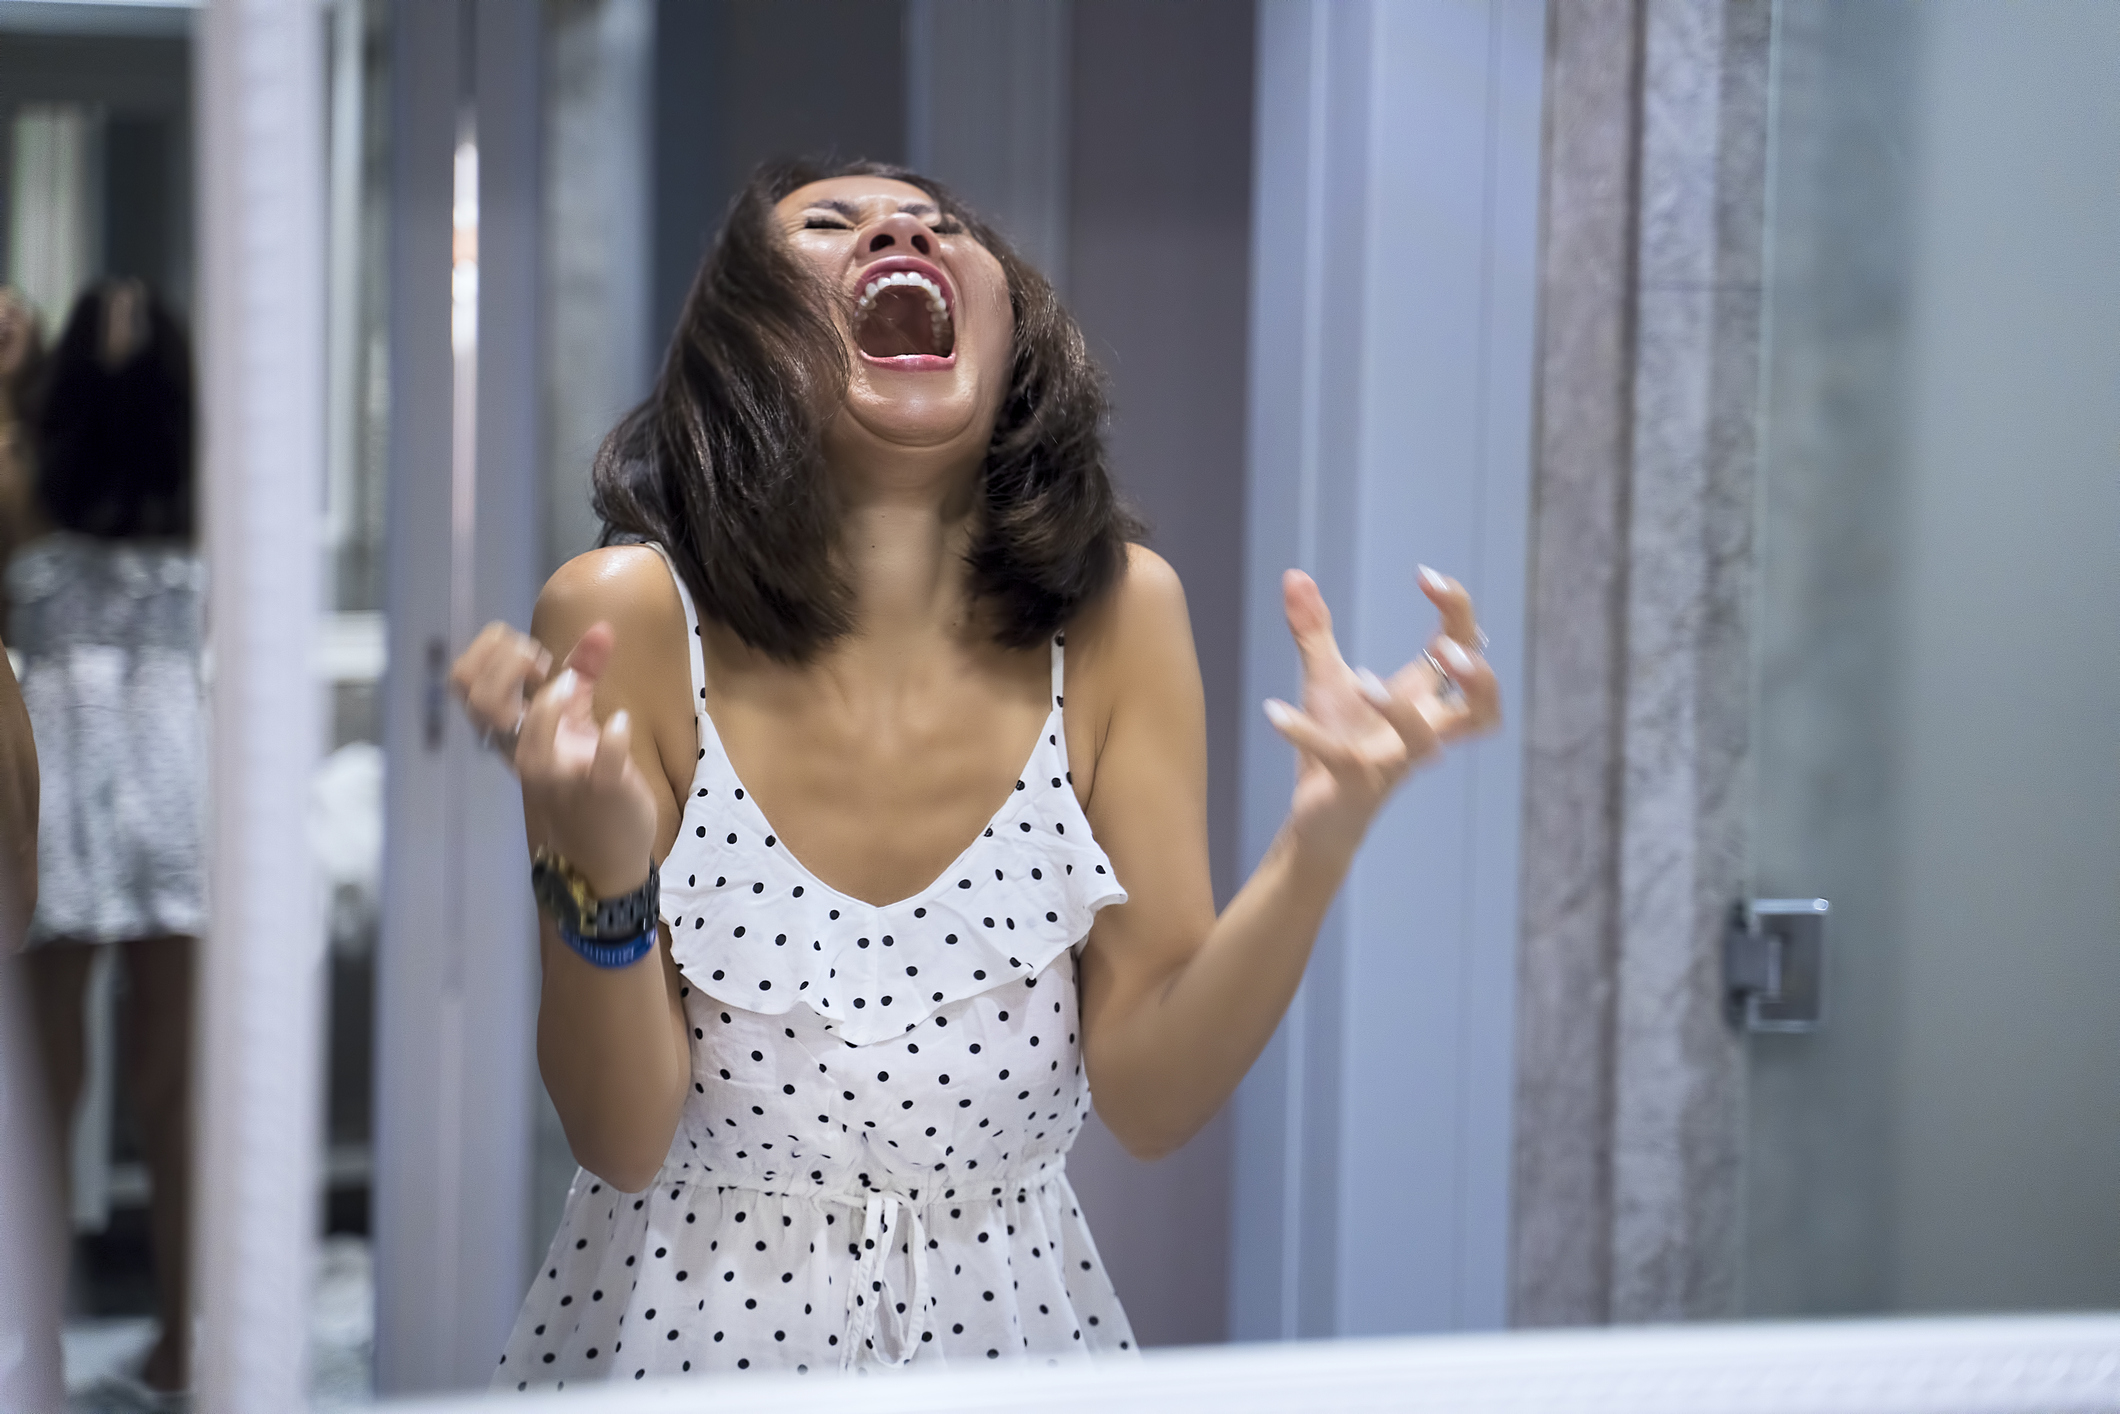 A woman with shoulder-length hair, wearing a white dress with black polka dots, is dramatically laughing or yelling in front of a mirror